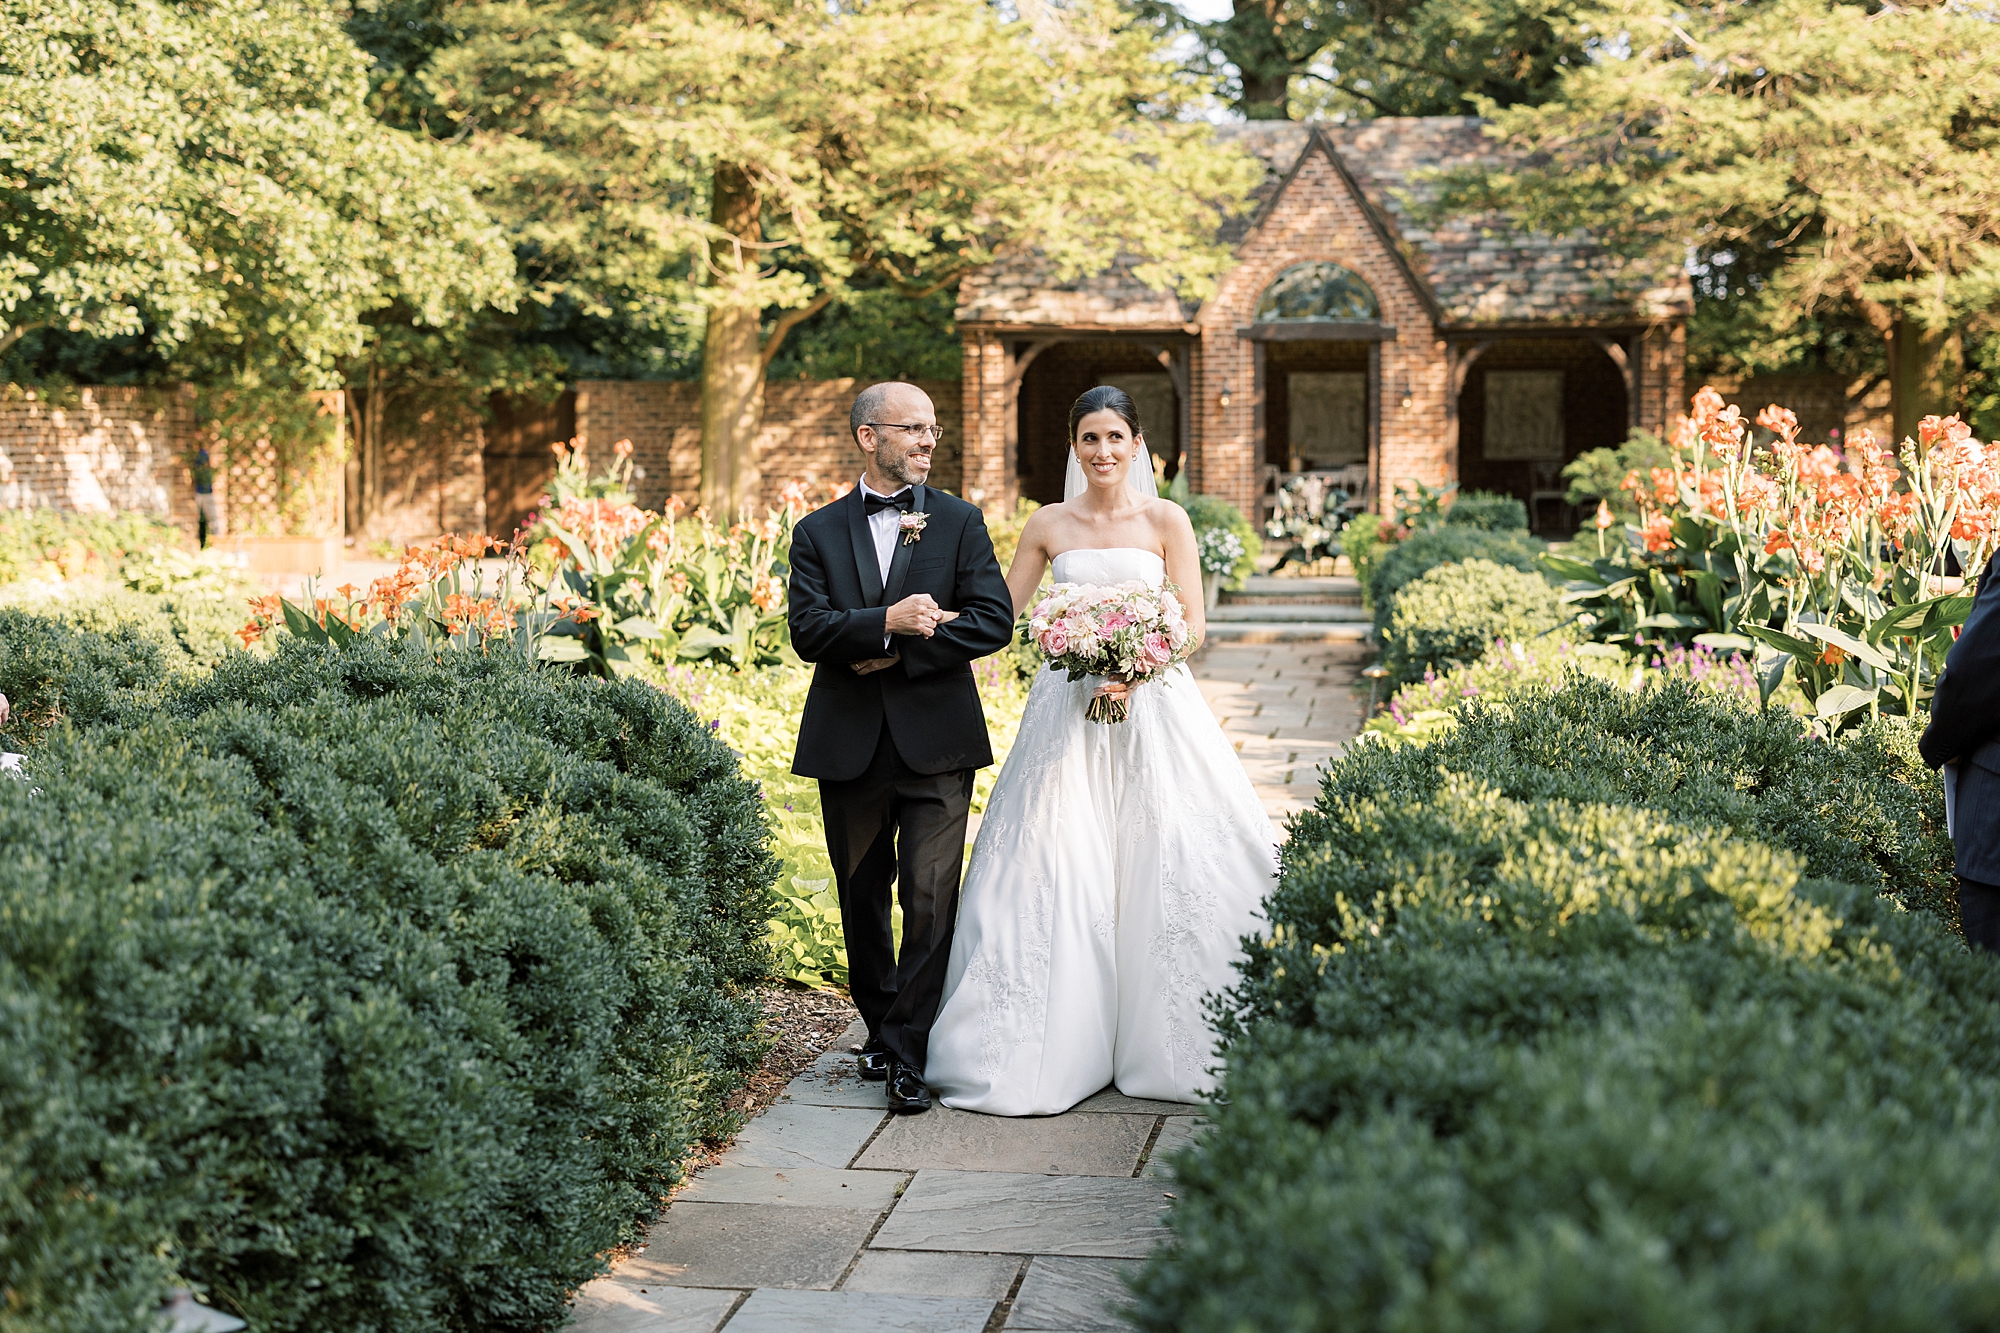 brother walks bride down aisle at Greenville Country Club